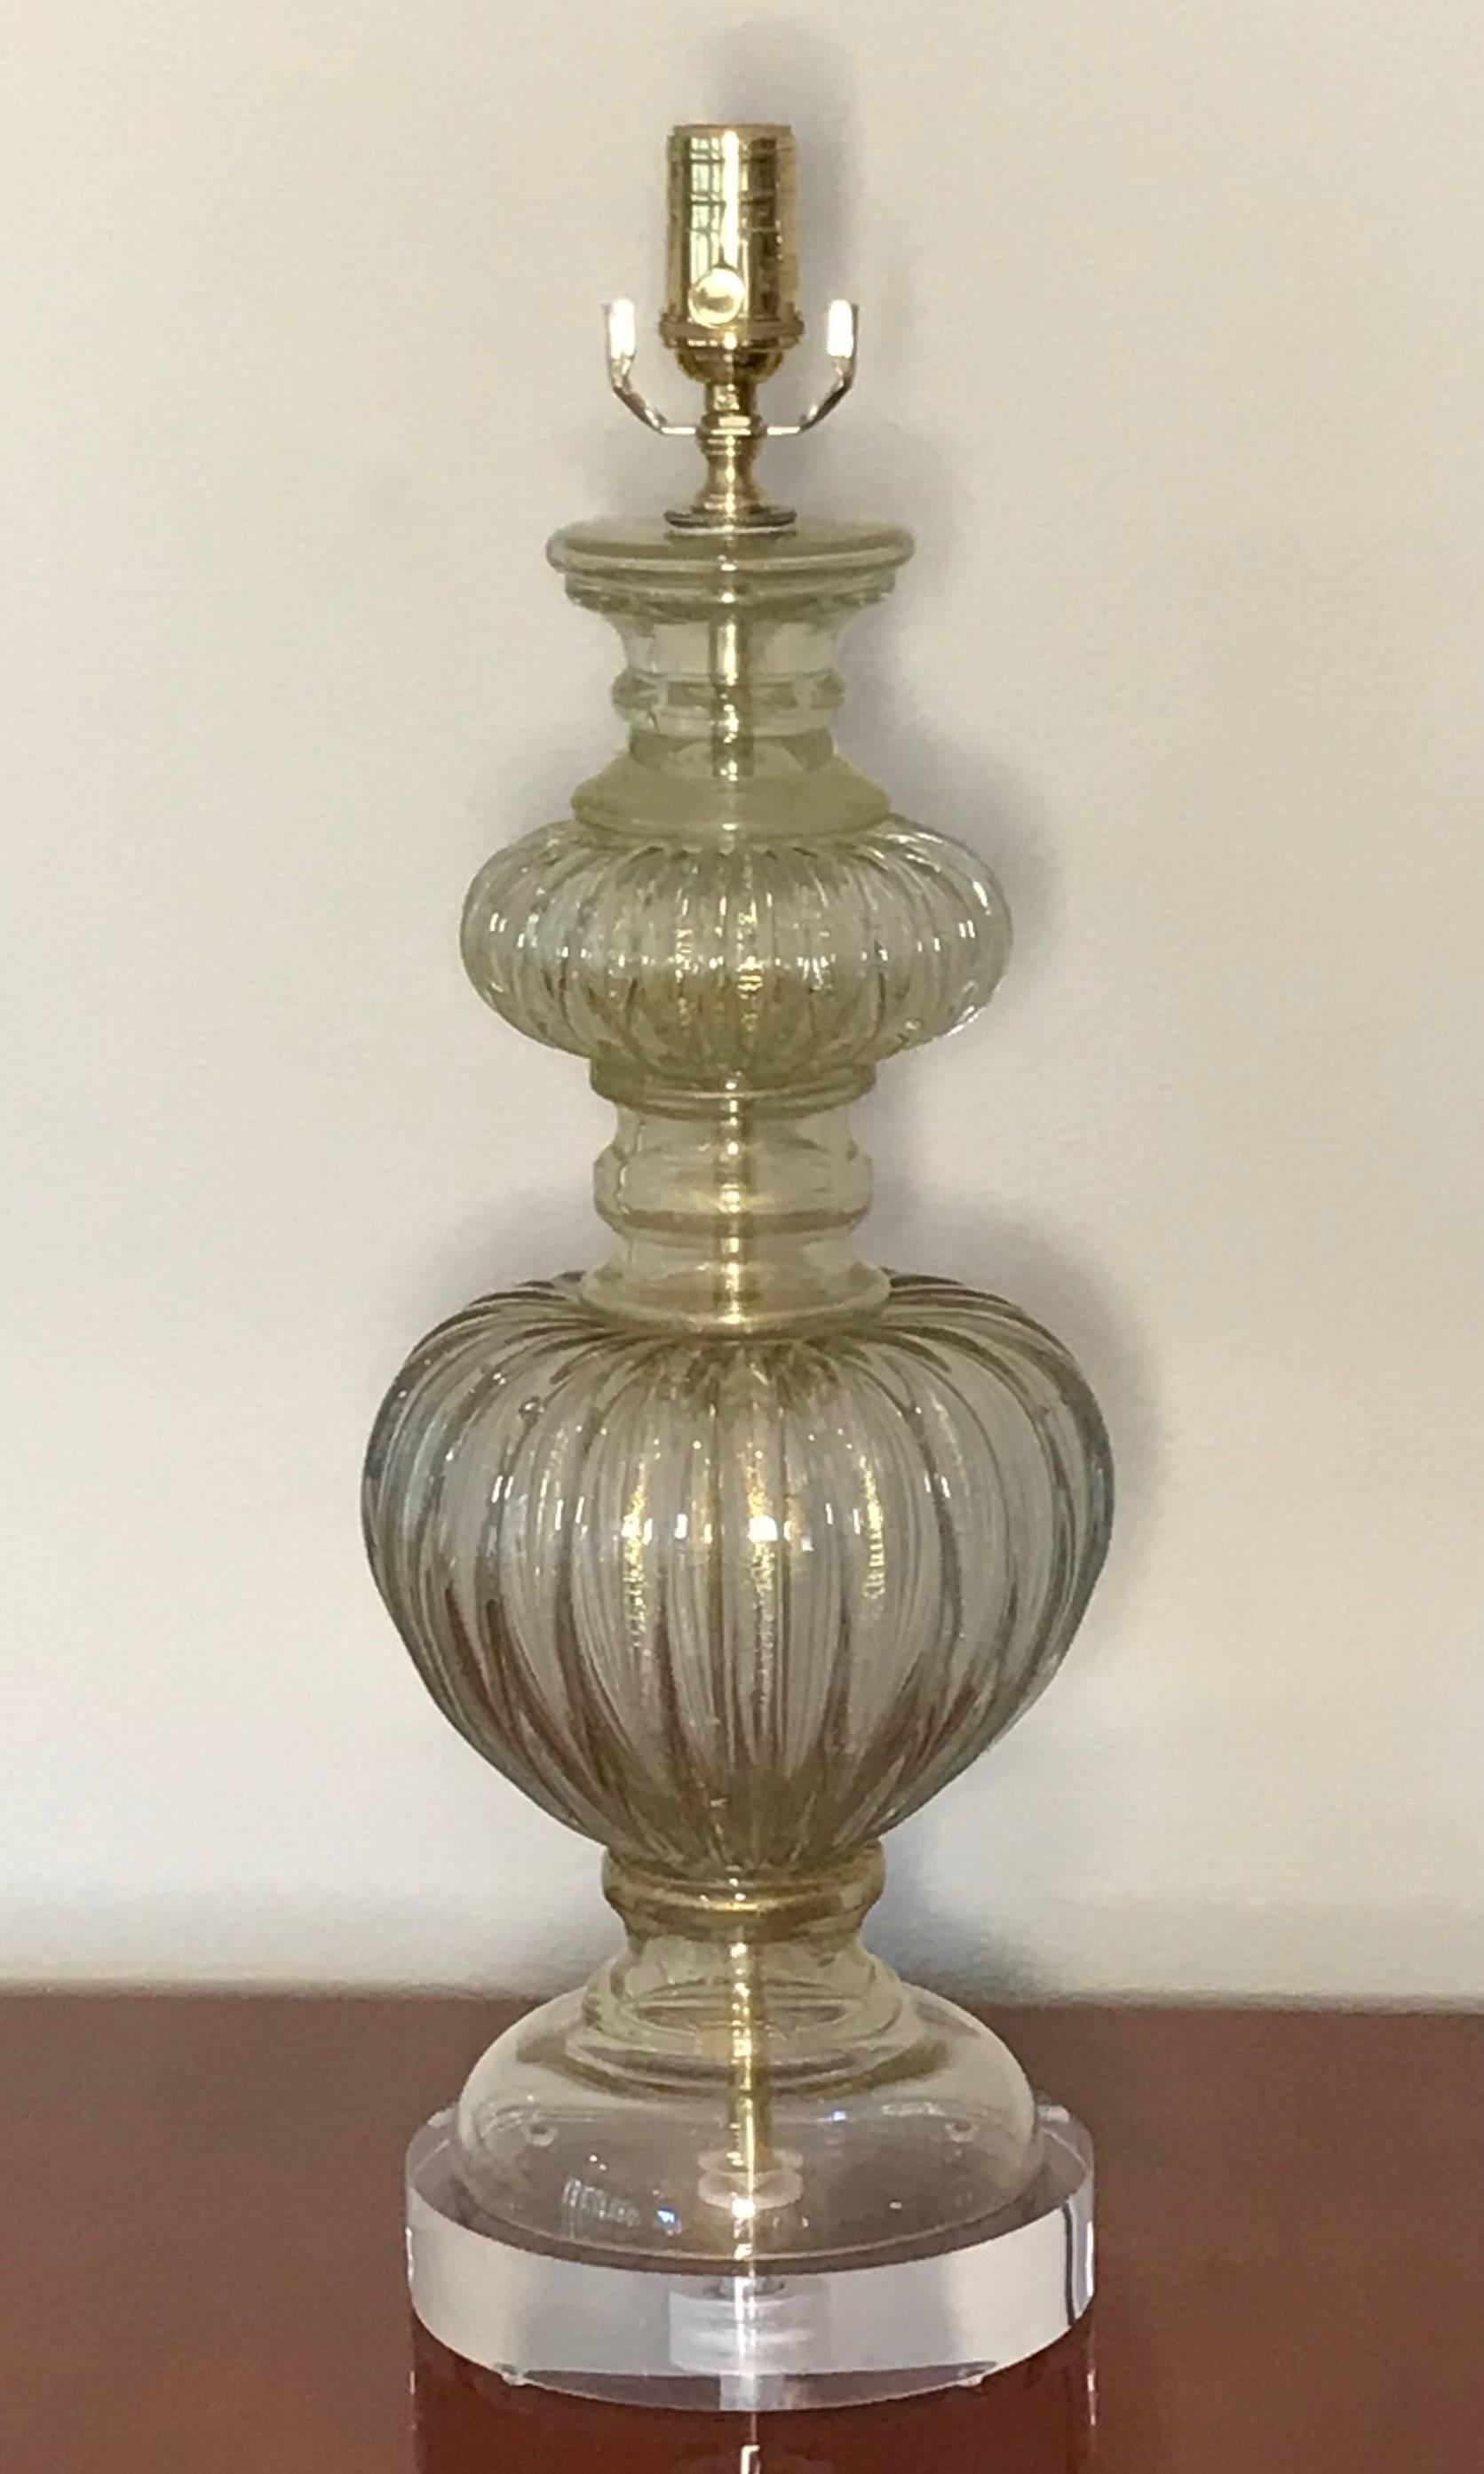 Single Italian Murano glass lamp composed of clear thick ribbed glass with gold inclusions. Newly wired for US on custom acrylic base with full range dimmer socket, brass fittings and French style rayon covered cord.

Measure: 24